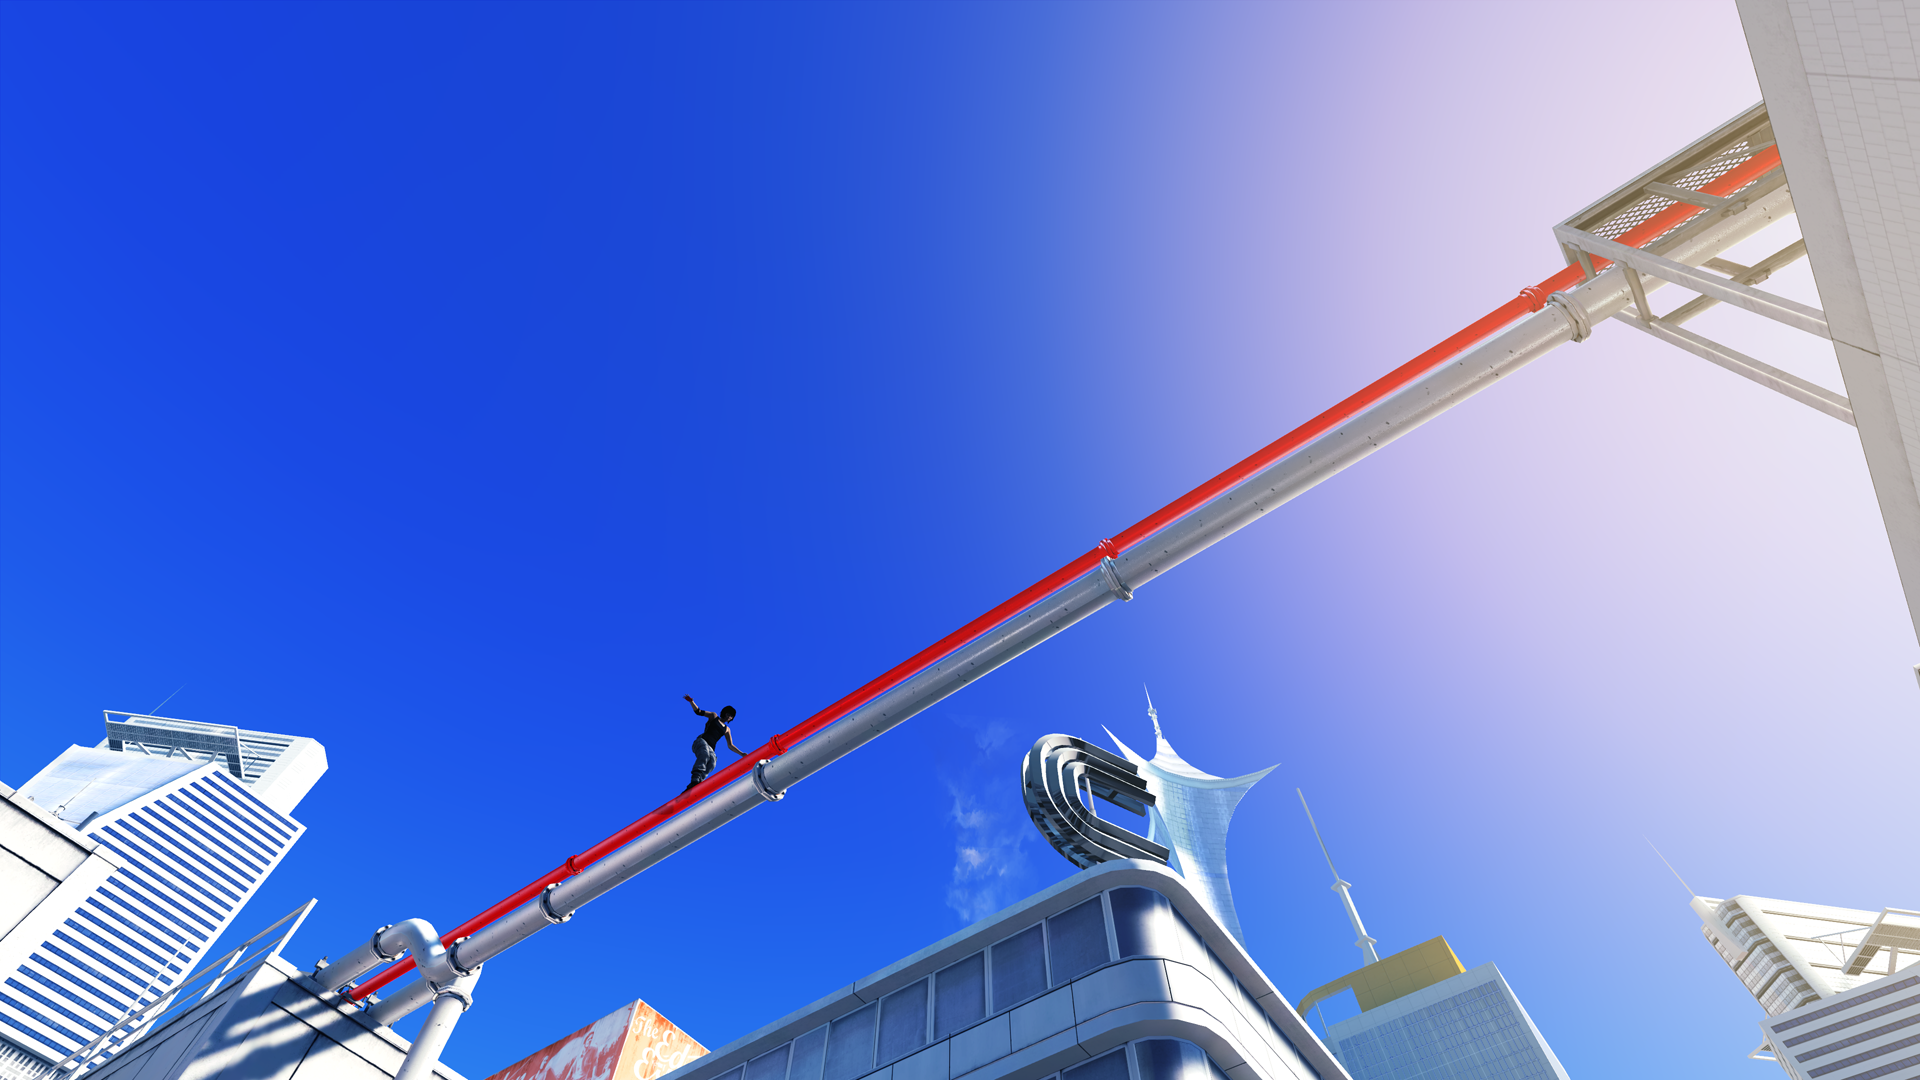 mirrorsedge_2014_03_28_22_06_07_994_by_dio141-d7c0xuk.png